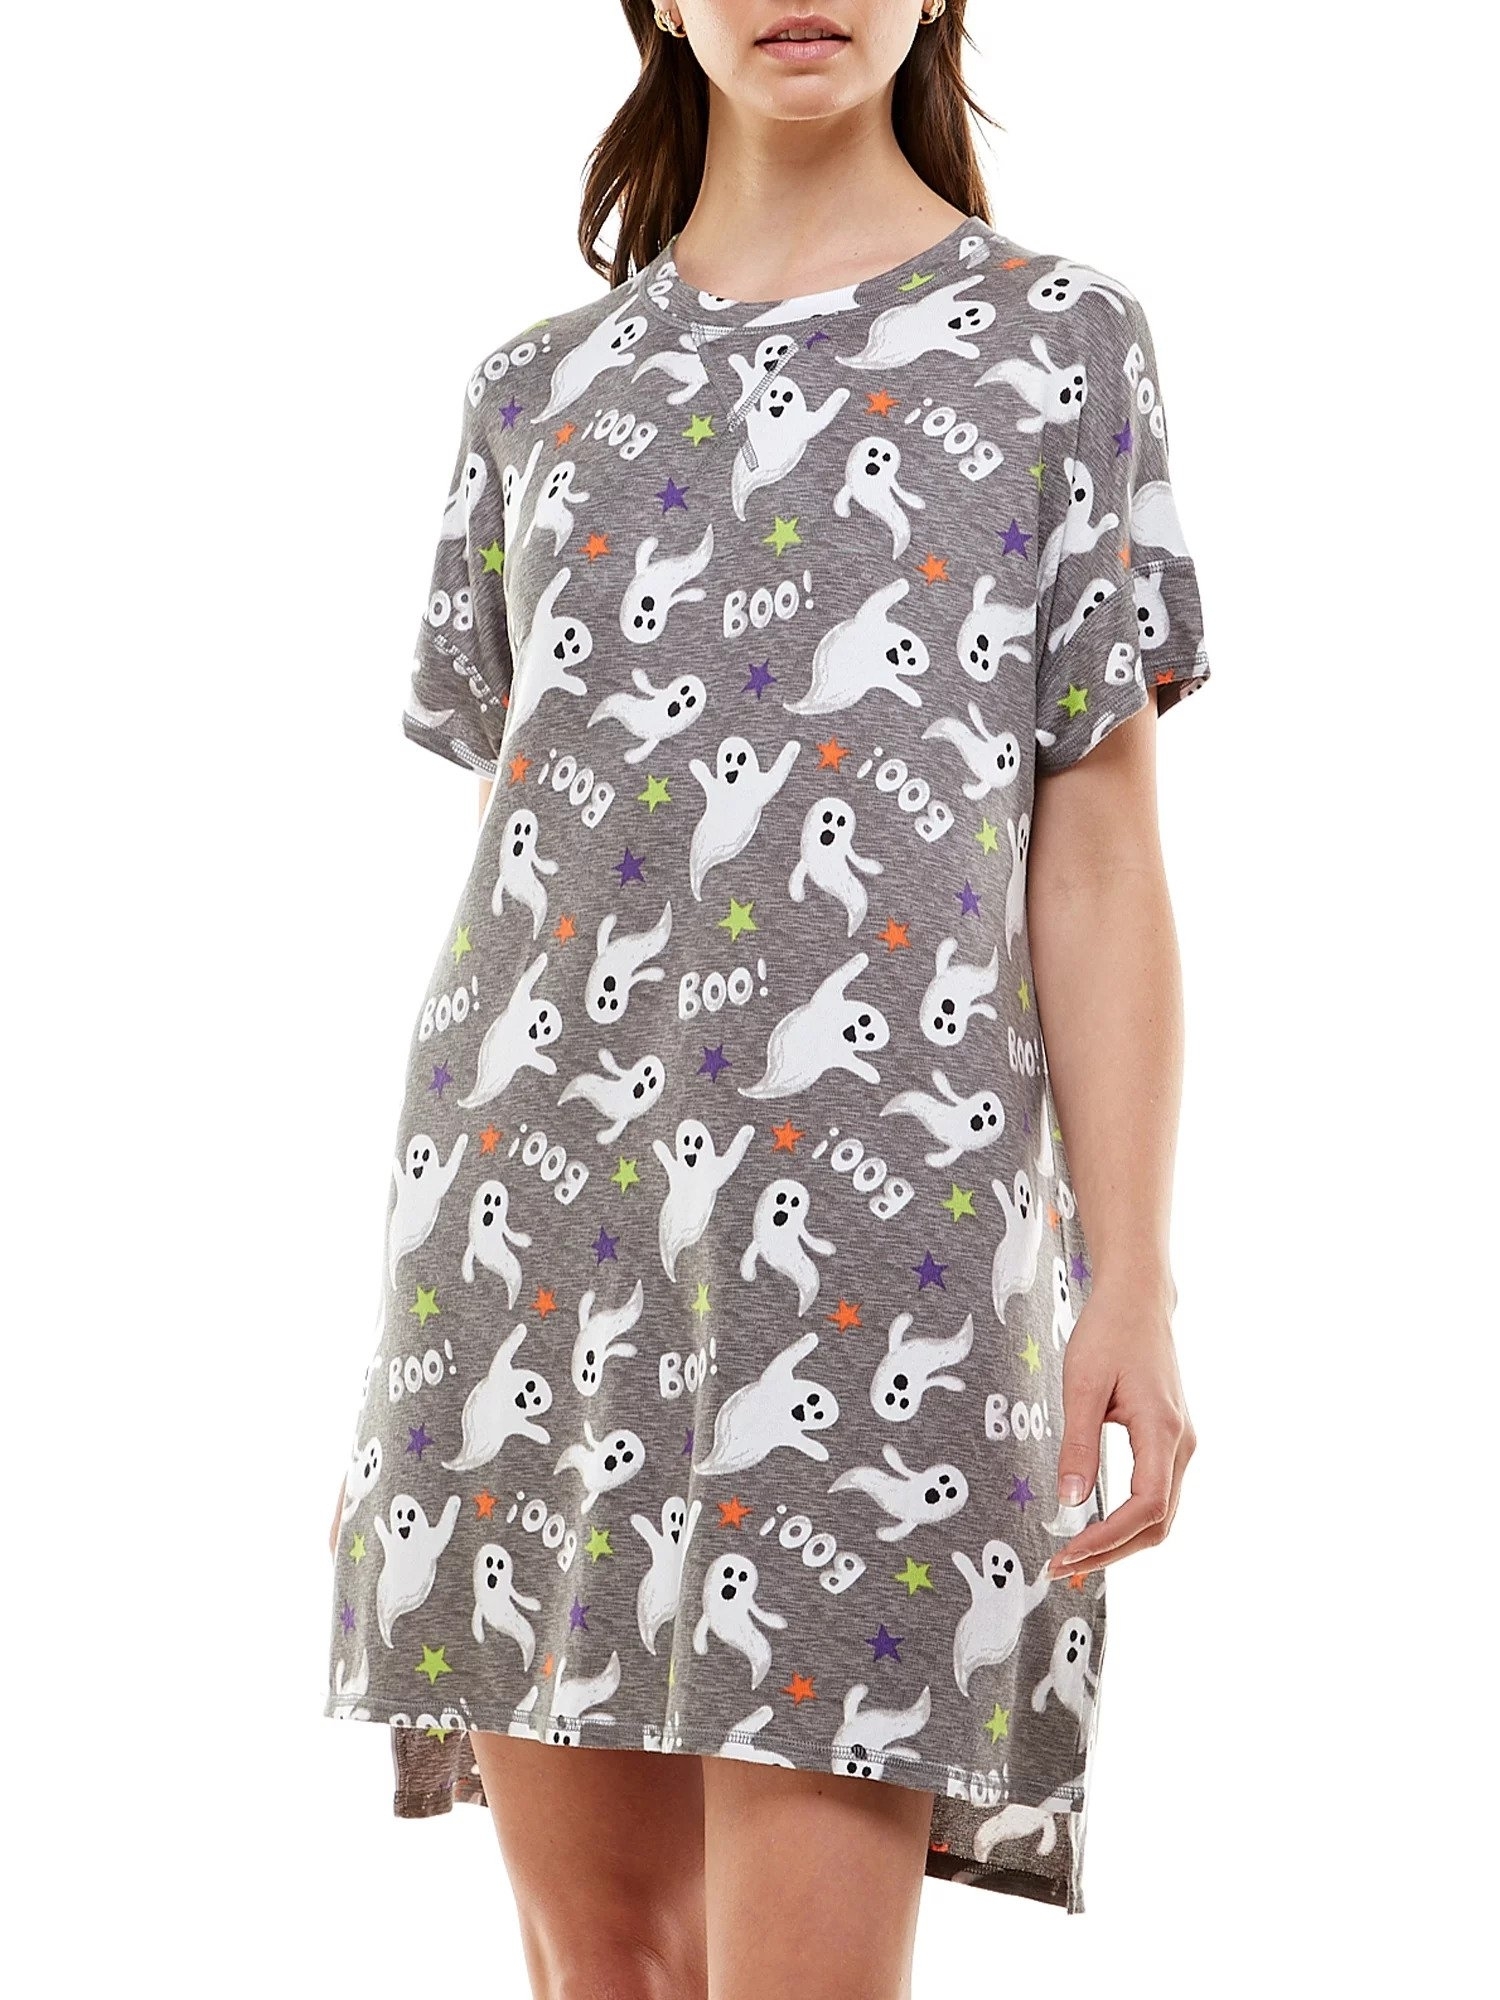 The gray sleep shirt featuring a playful ghost pattern